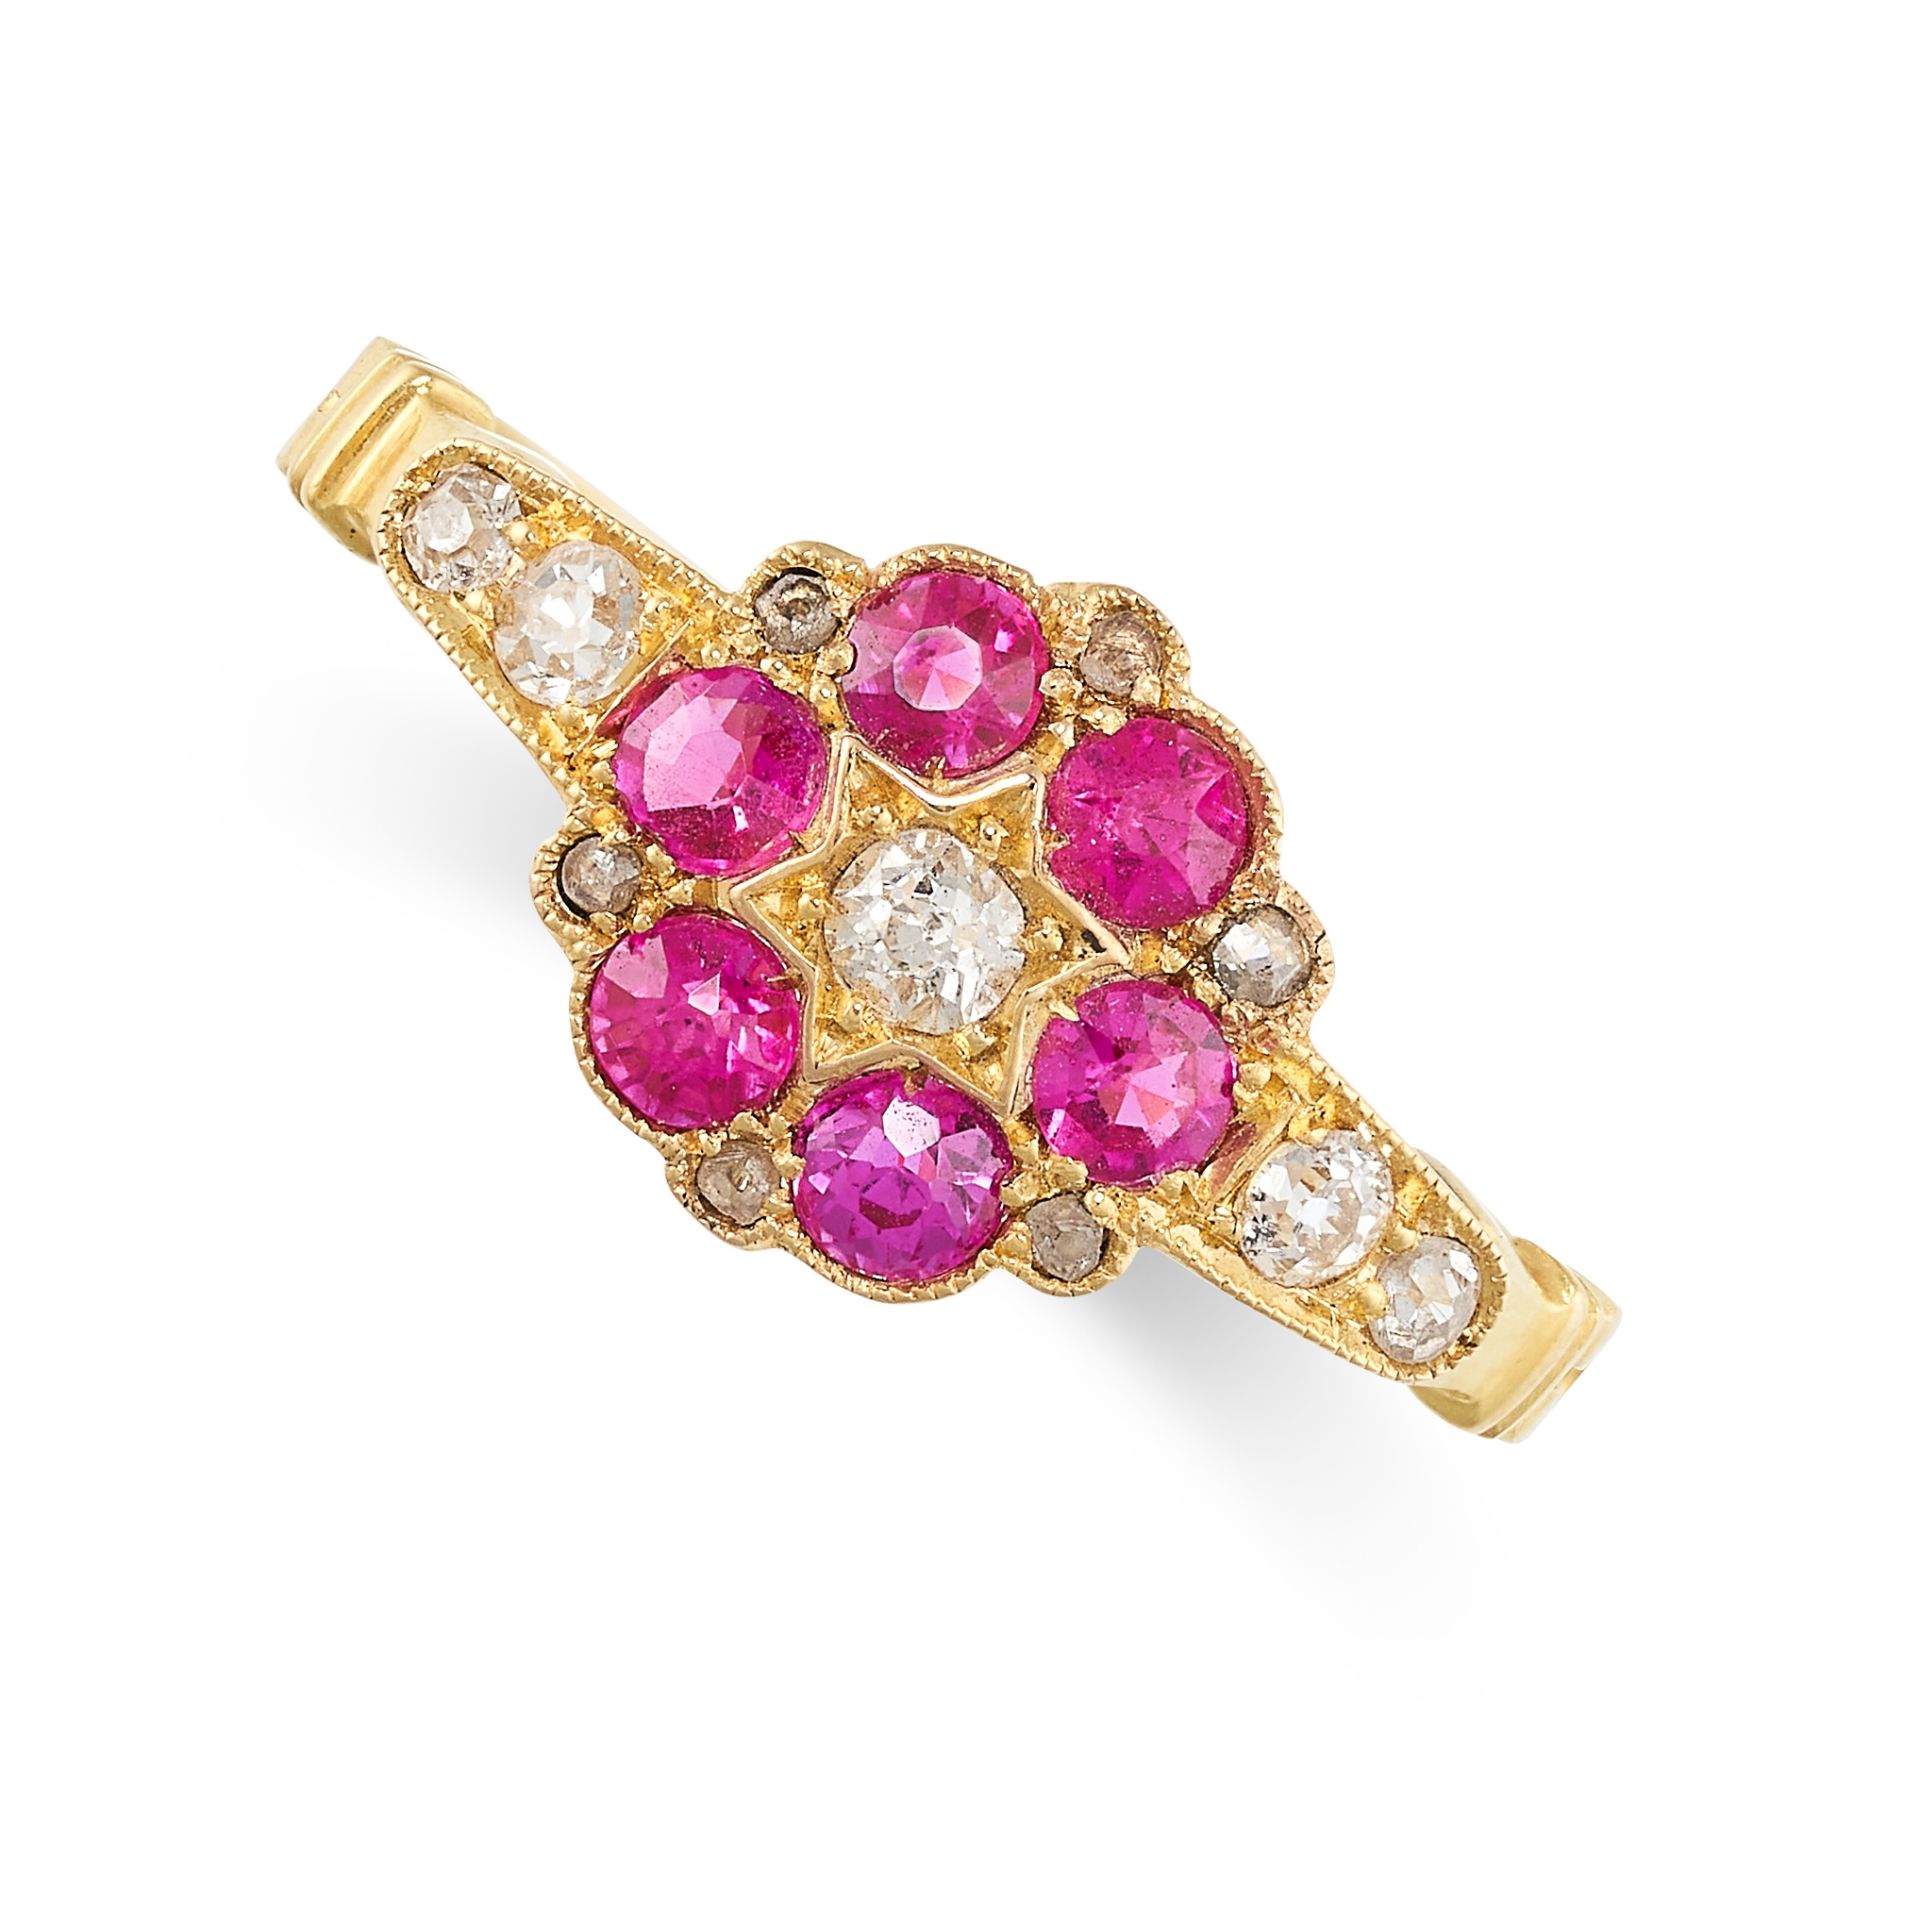 A RUBY AND DIAMOND DRESS RING in yellow gold, set with an old cut diamond within a border of round